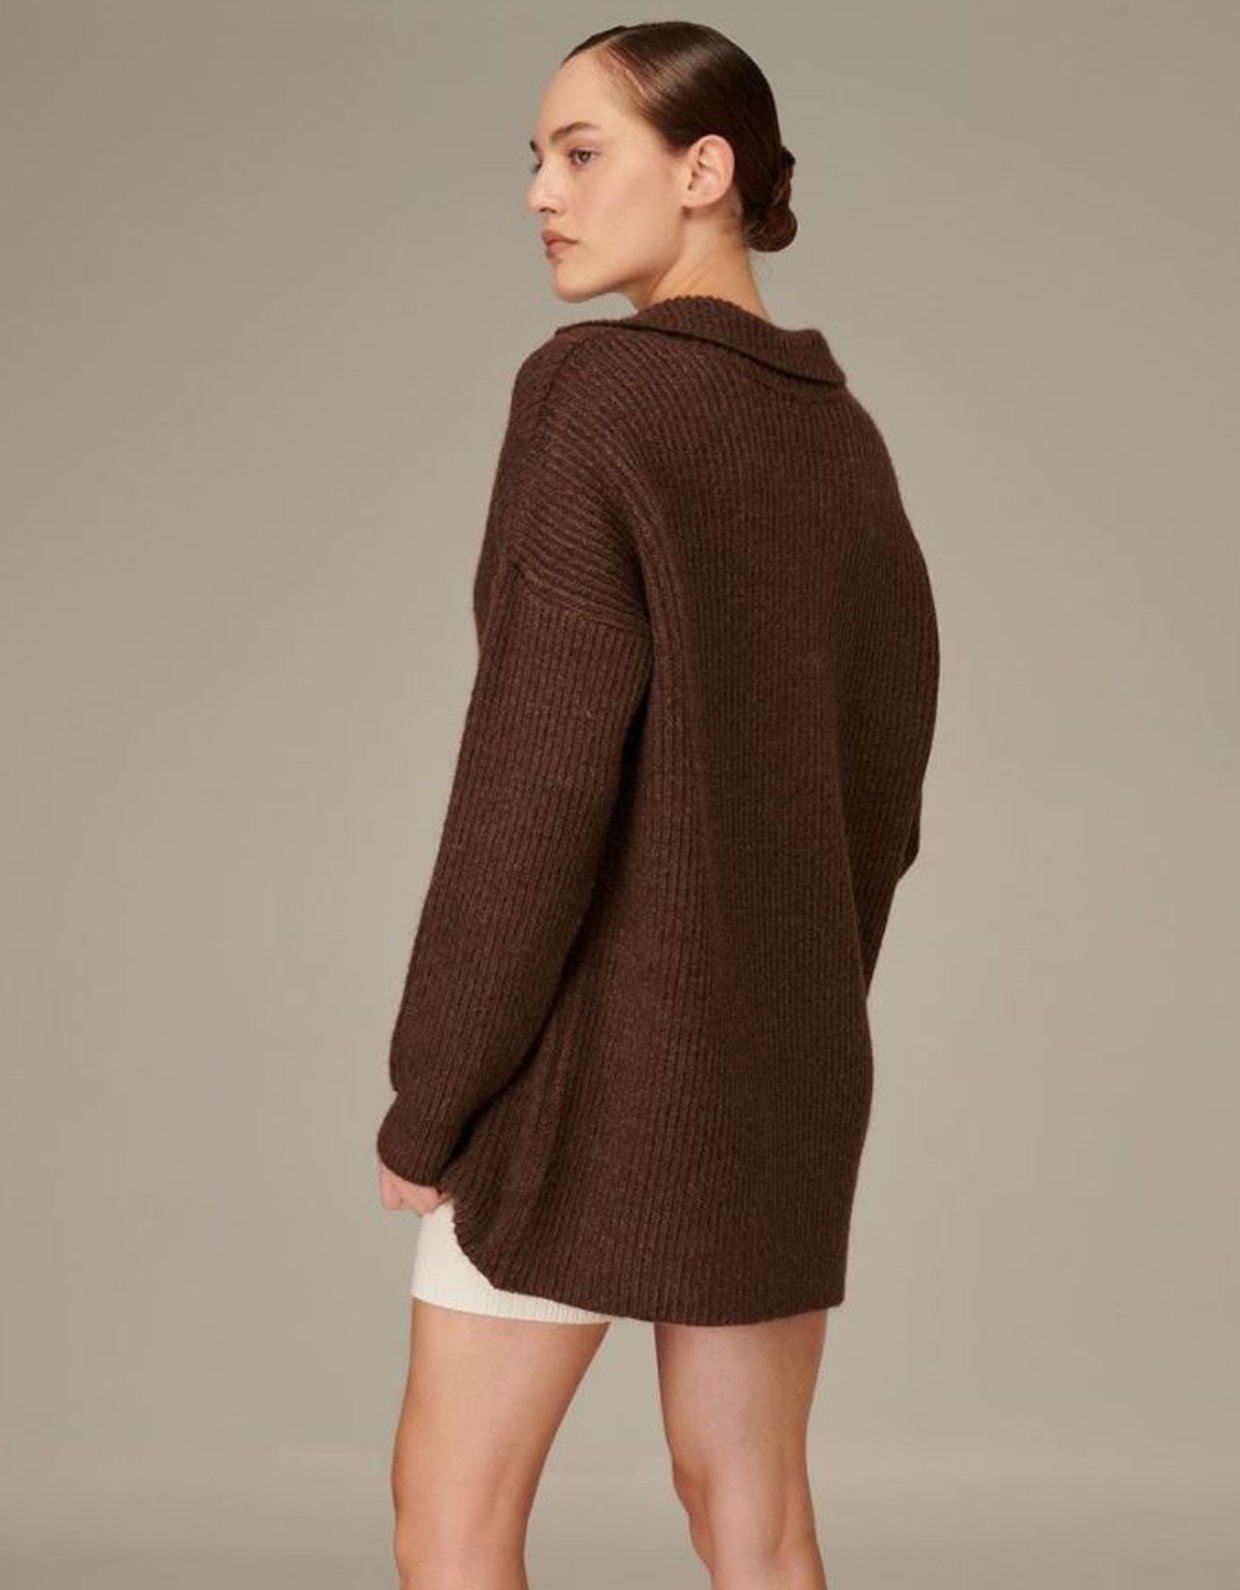 Combos Knitwear Combos W203  – Polo sweater dress brown